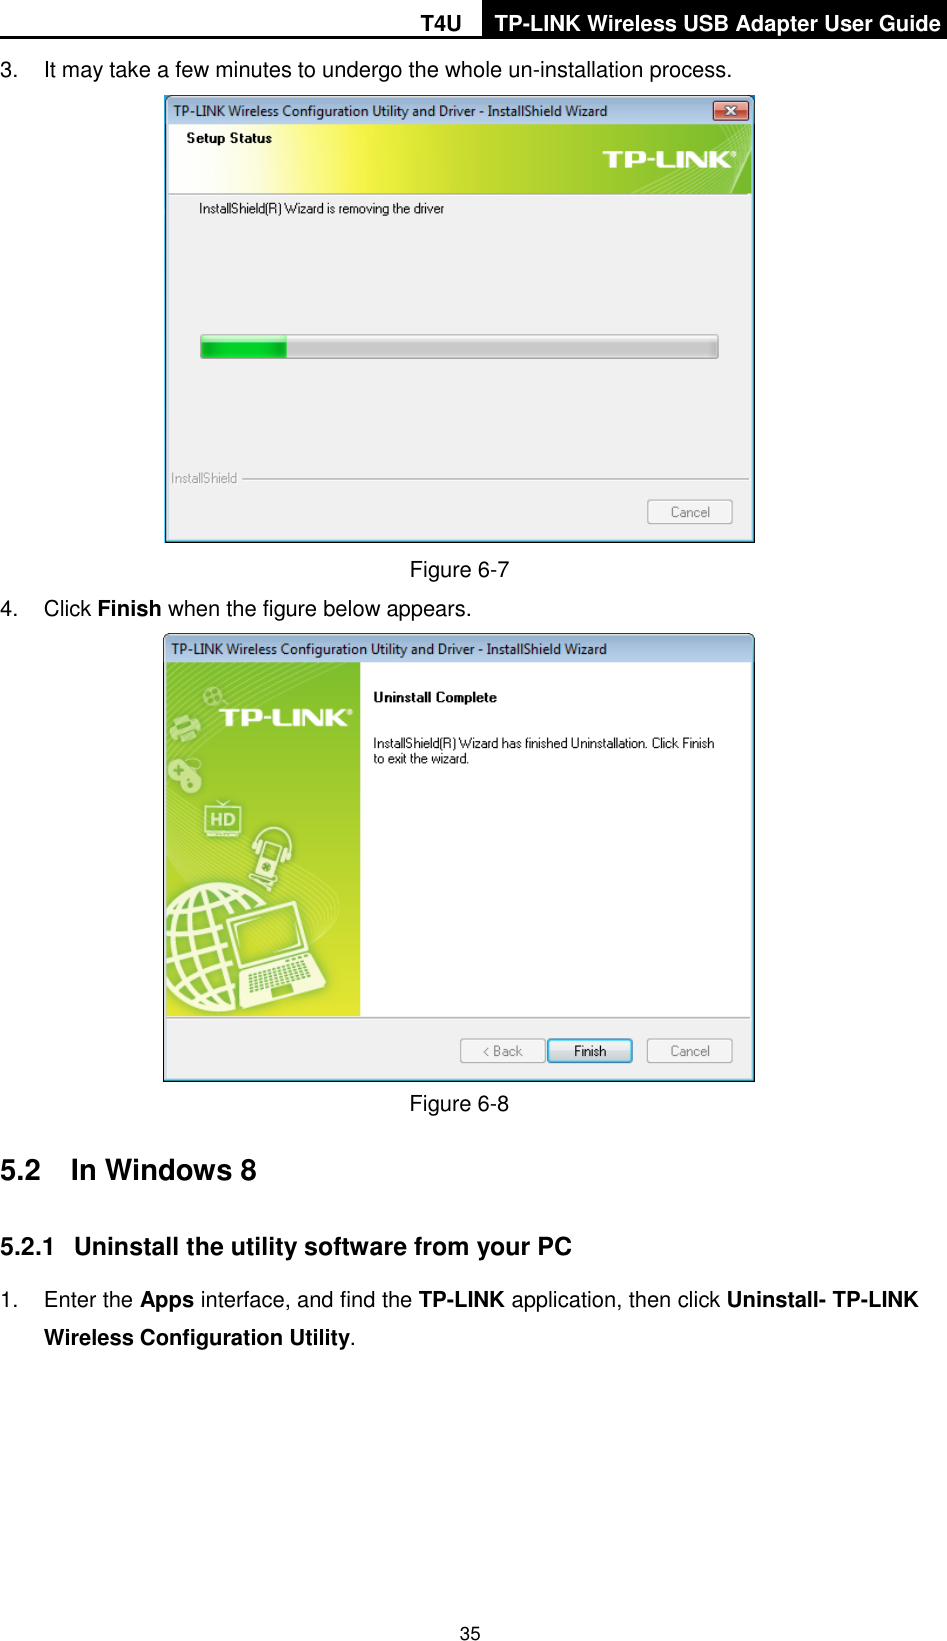 T4U TP-LINK Wireless USB Adapter User Guide   35 3.  It may take a few minutes to undergo the whole un-installation process.  Figure 6-7 4.  Click Finish when the figure below appears.  Figure 6-8   5.2  In Windows 8 5.2.1  Uninstall the utility software from your PC 1.  Enter the Apps interface, and find the TP-LINK application, then click Uninstall- TP-LINK Wireless Configuration Utility. 